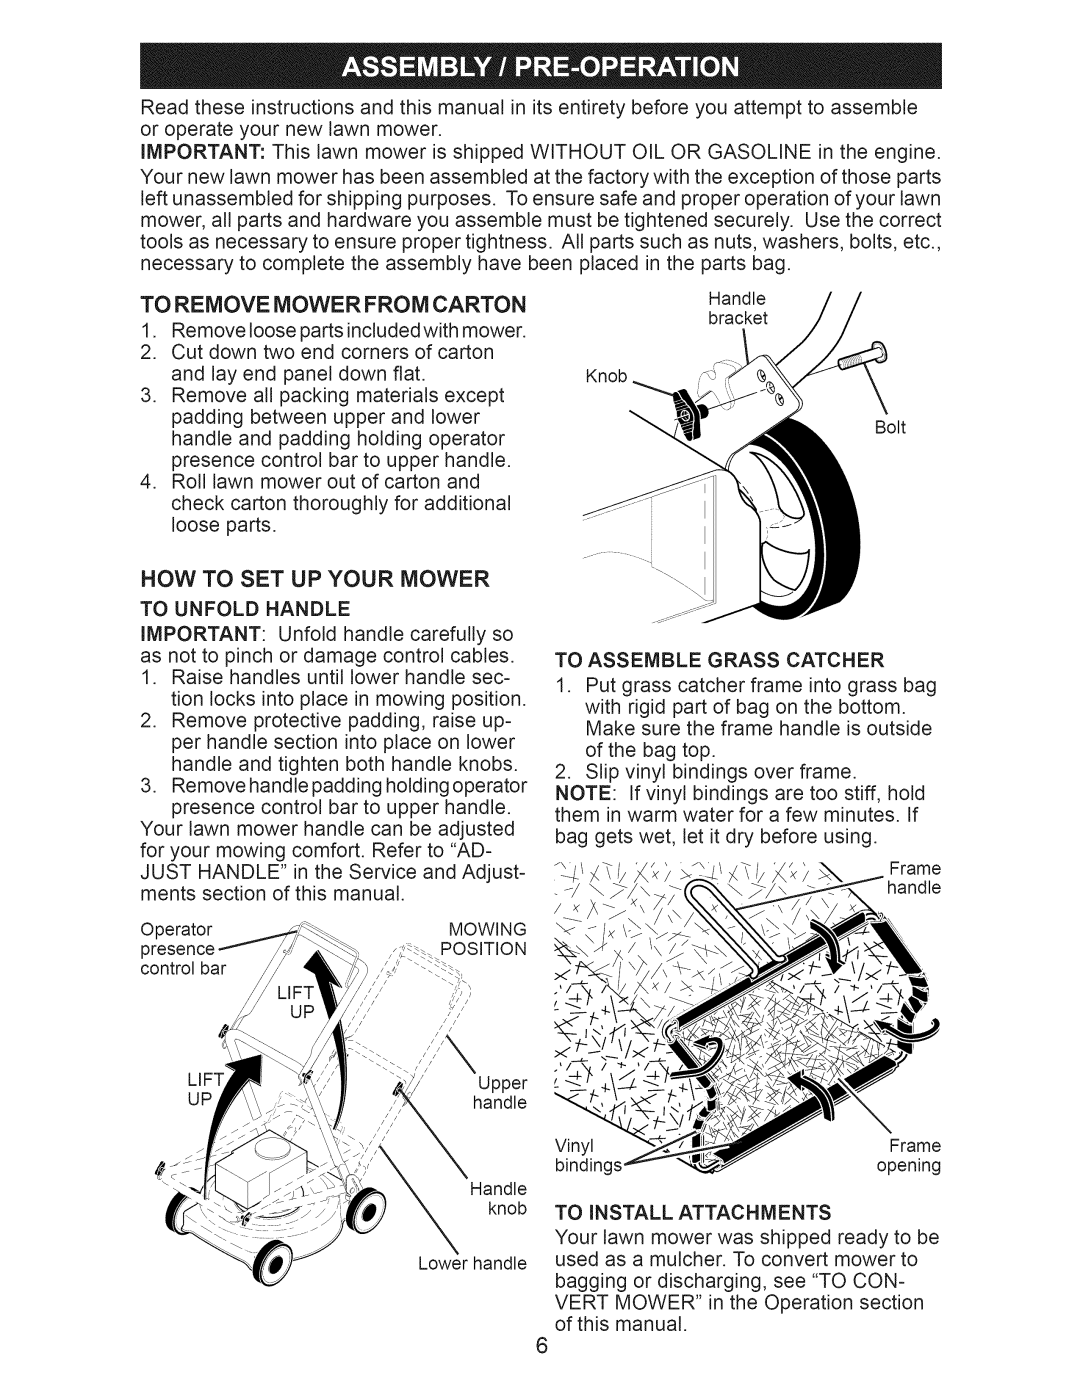 Craftsman 917.370620 owner manual To Remove Mower From Carton, Now To Set Up Your Mower 